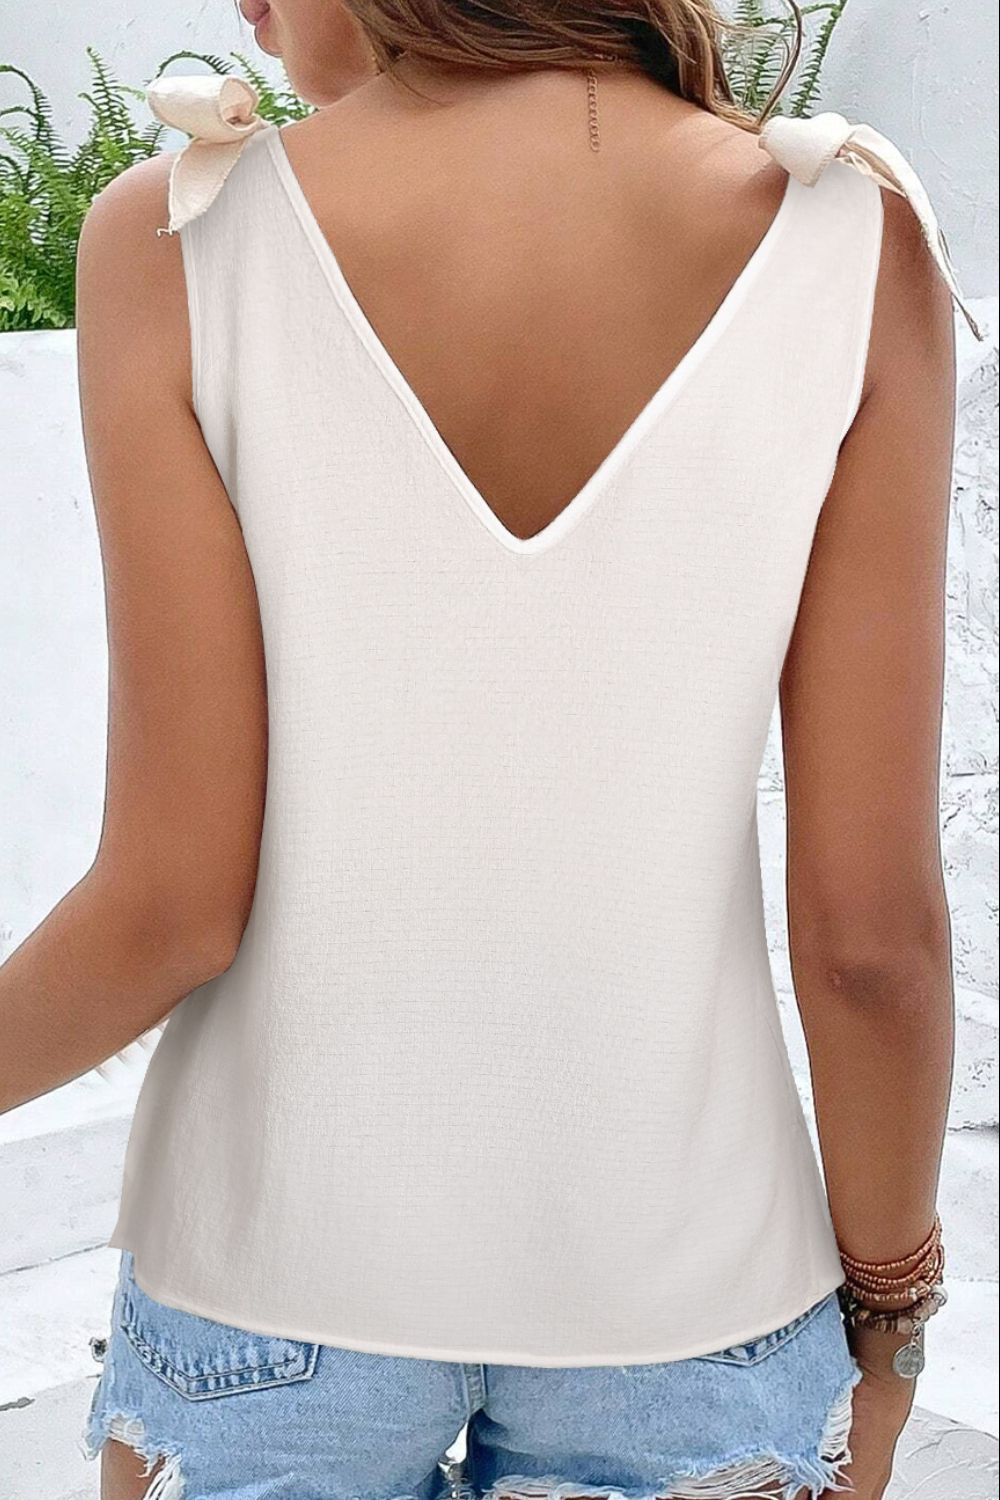 Boho-chic white tank top with eye-catching front embroidery